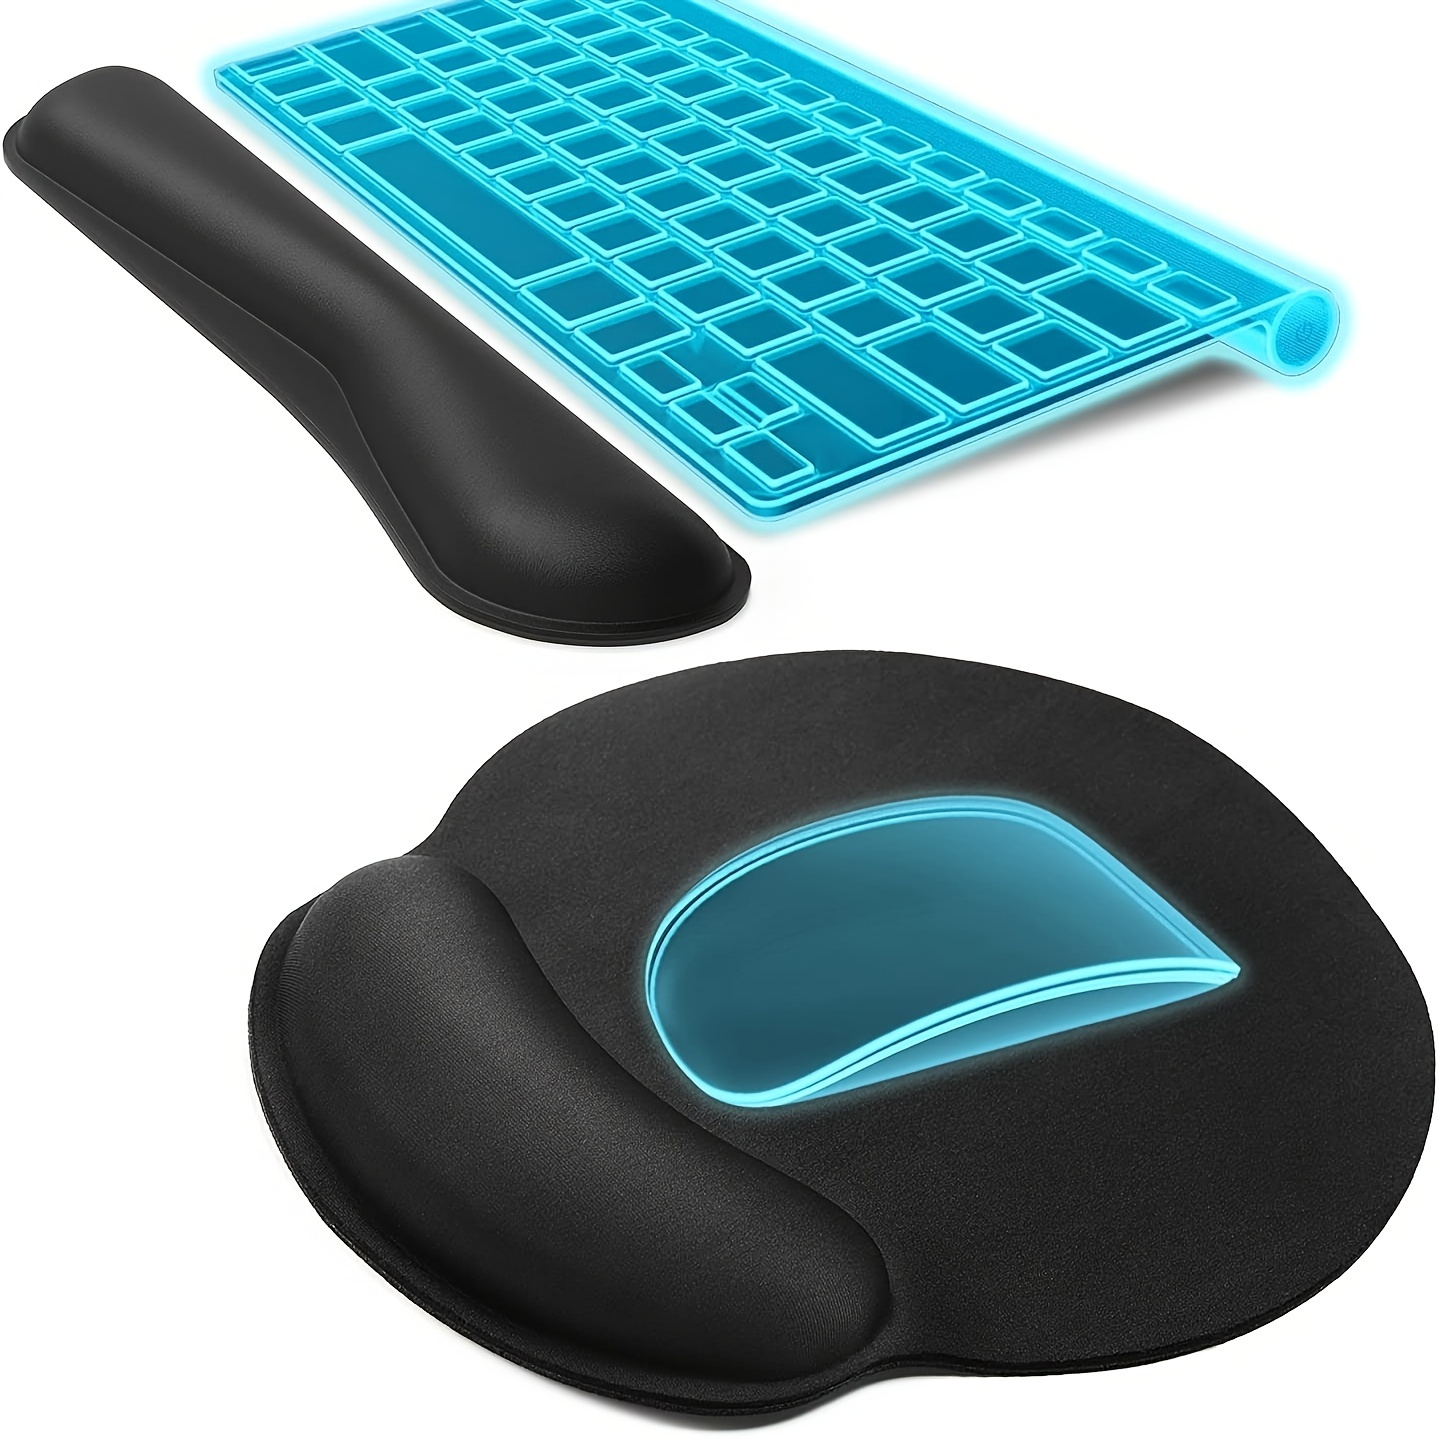 Keyboard Wrist Rest Cute Wrist Rest Mouse Pad, Animal Design Soft Keyboard  Wrist Support Cushion Pad Ergonomic Keyboard Hand Rest Arm Rest Pillow For  Office Desk Computer Laptop,Comfortable And Pain Relief